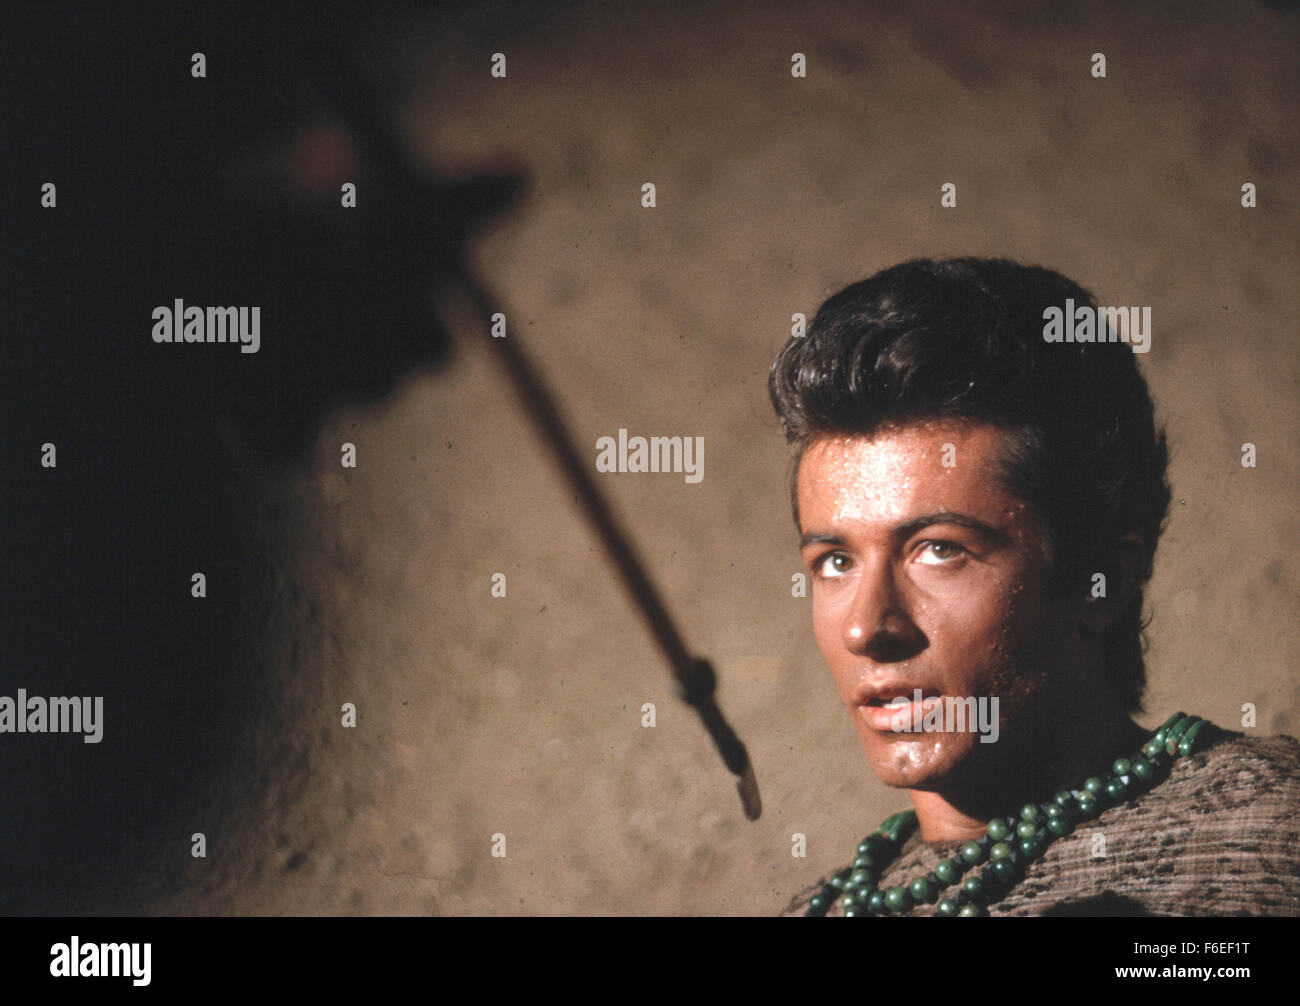 RELEASE DATE: Dec 18th, 1963. MOVIE TITLE: Kings of the Sun. STUDIO: CBS Television. PICTURED: GEORGE CHAKIRIS as Balam, movie art. Stock Photo